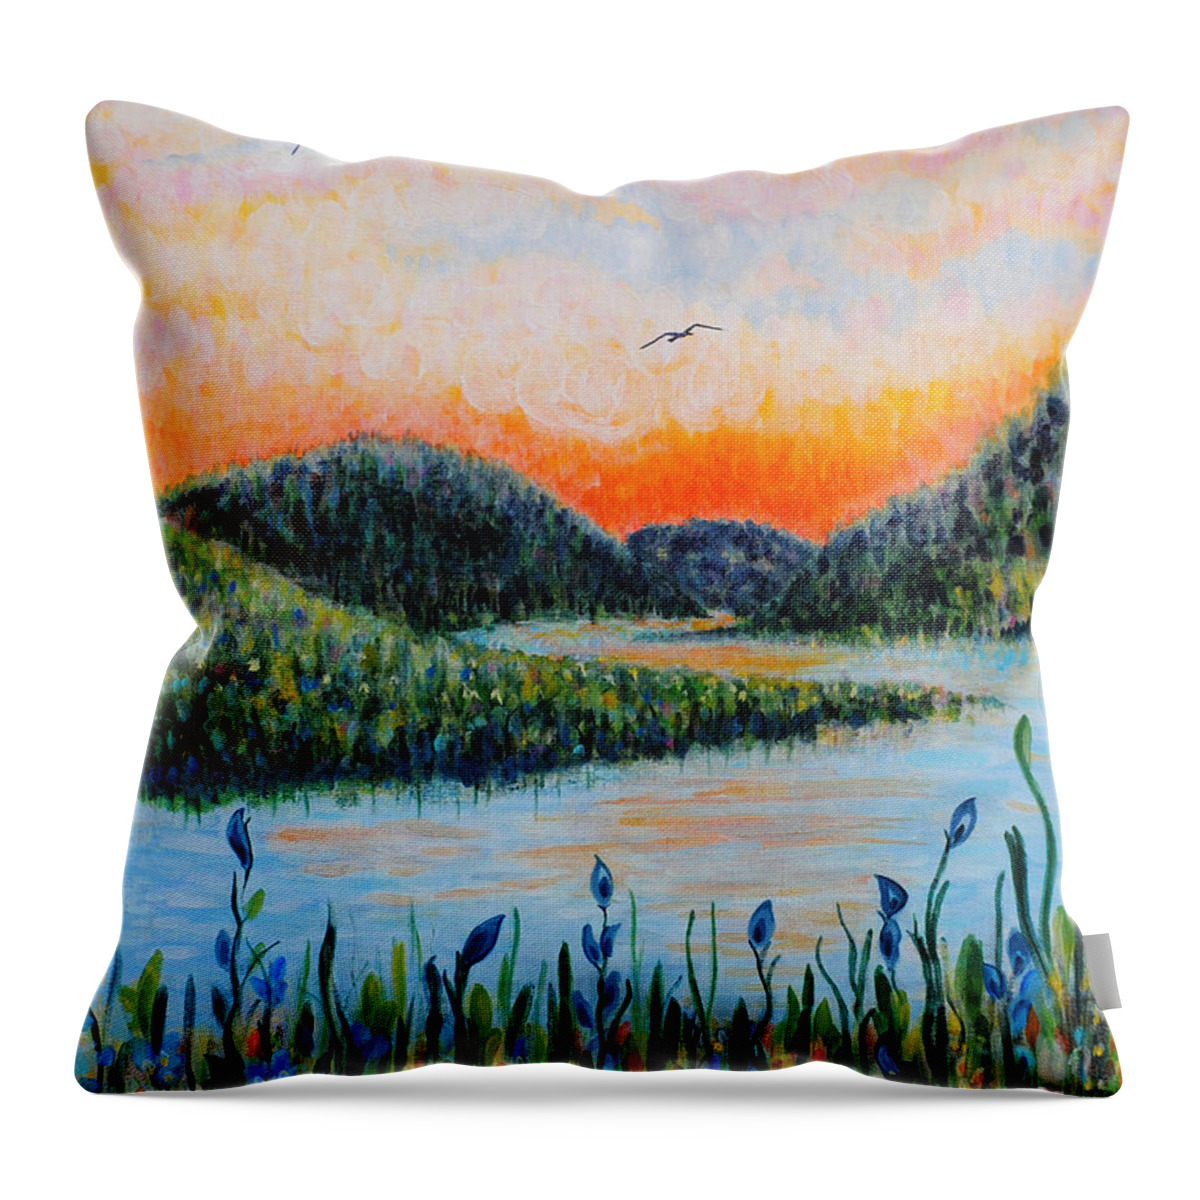 Lazy River Throw Pillow featuring the painting Lazy River by Holly Carmichael